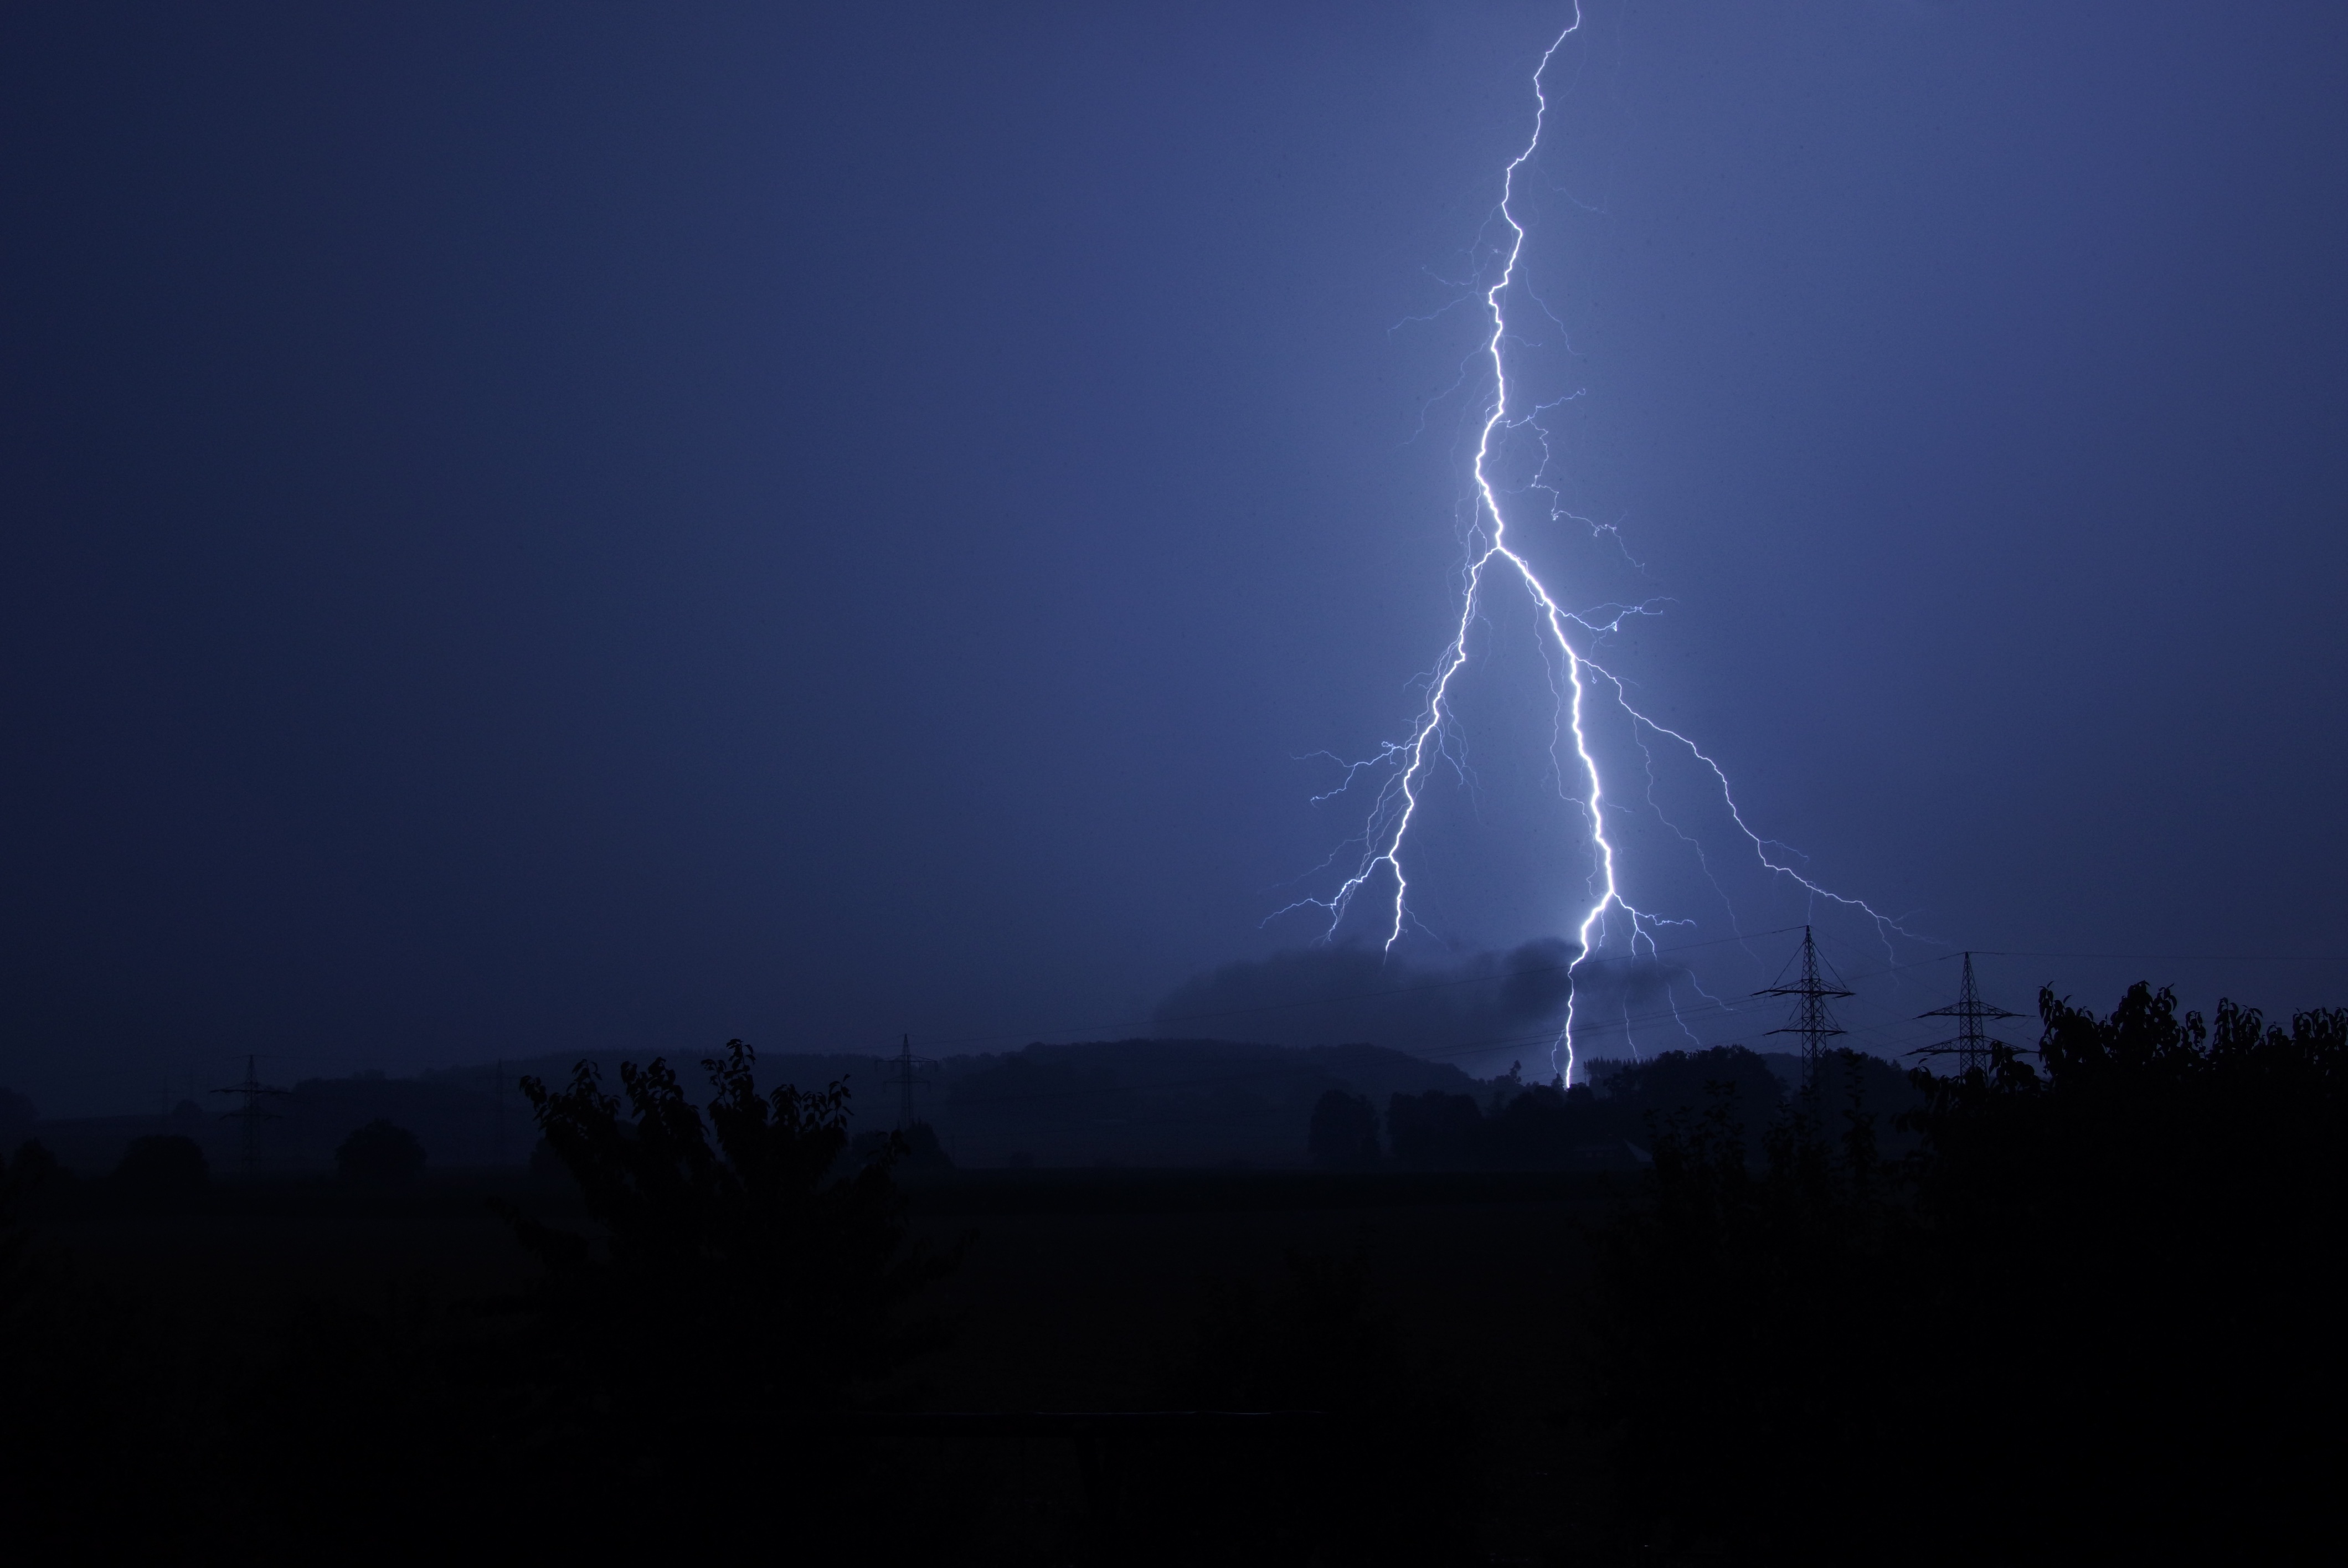 Lightning strike myths, facts, and protection